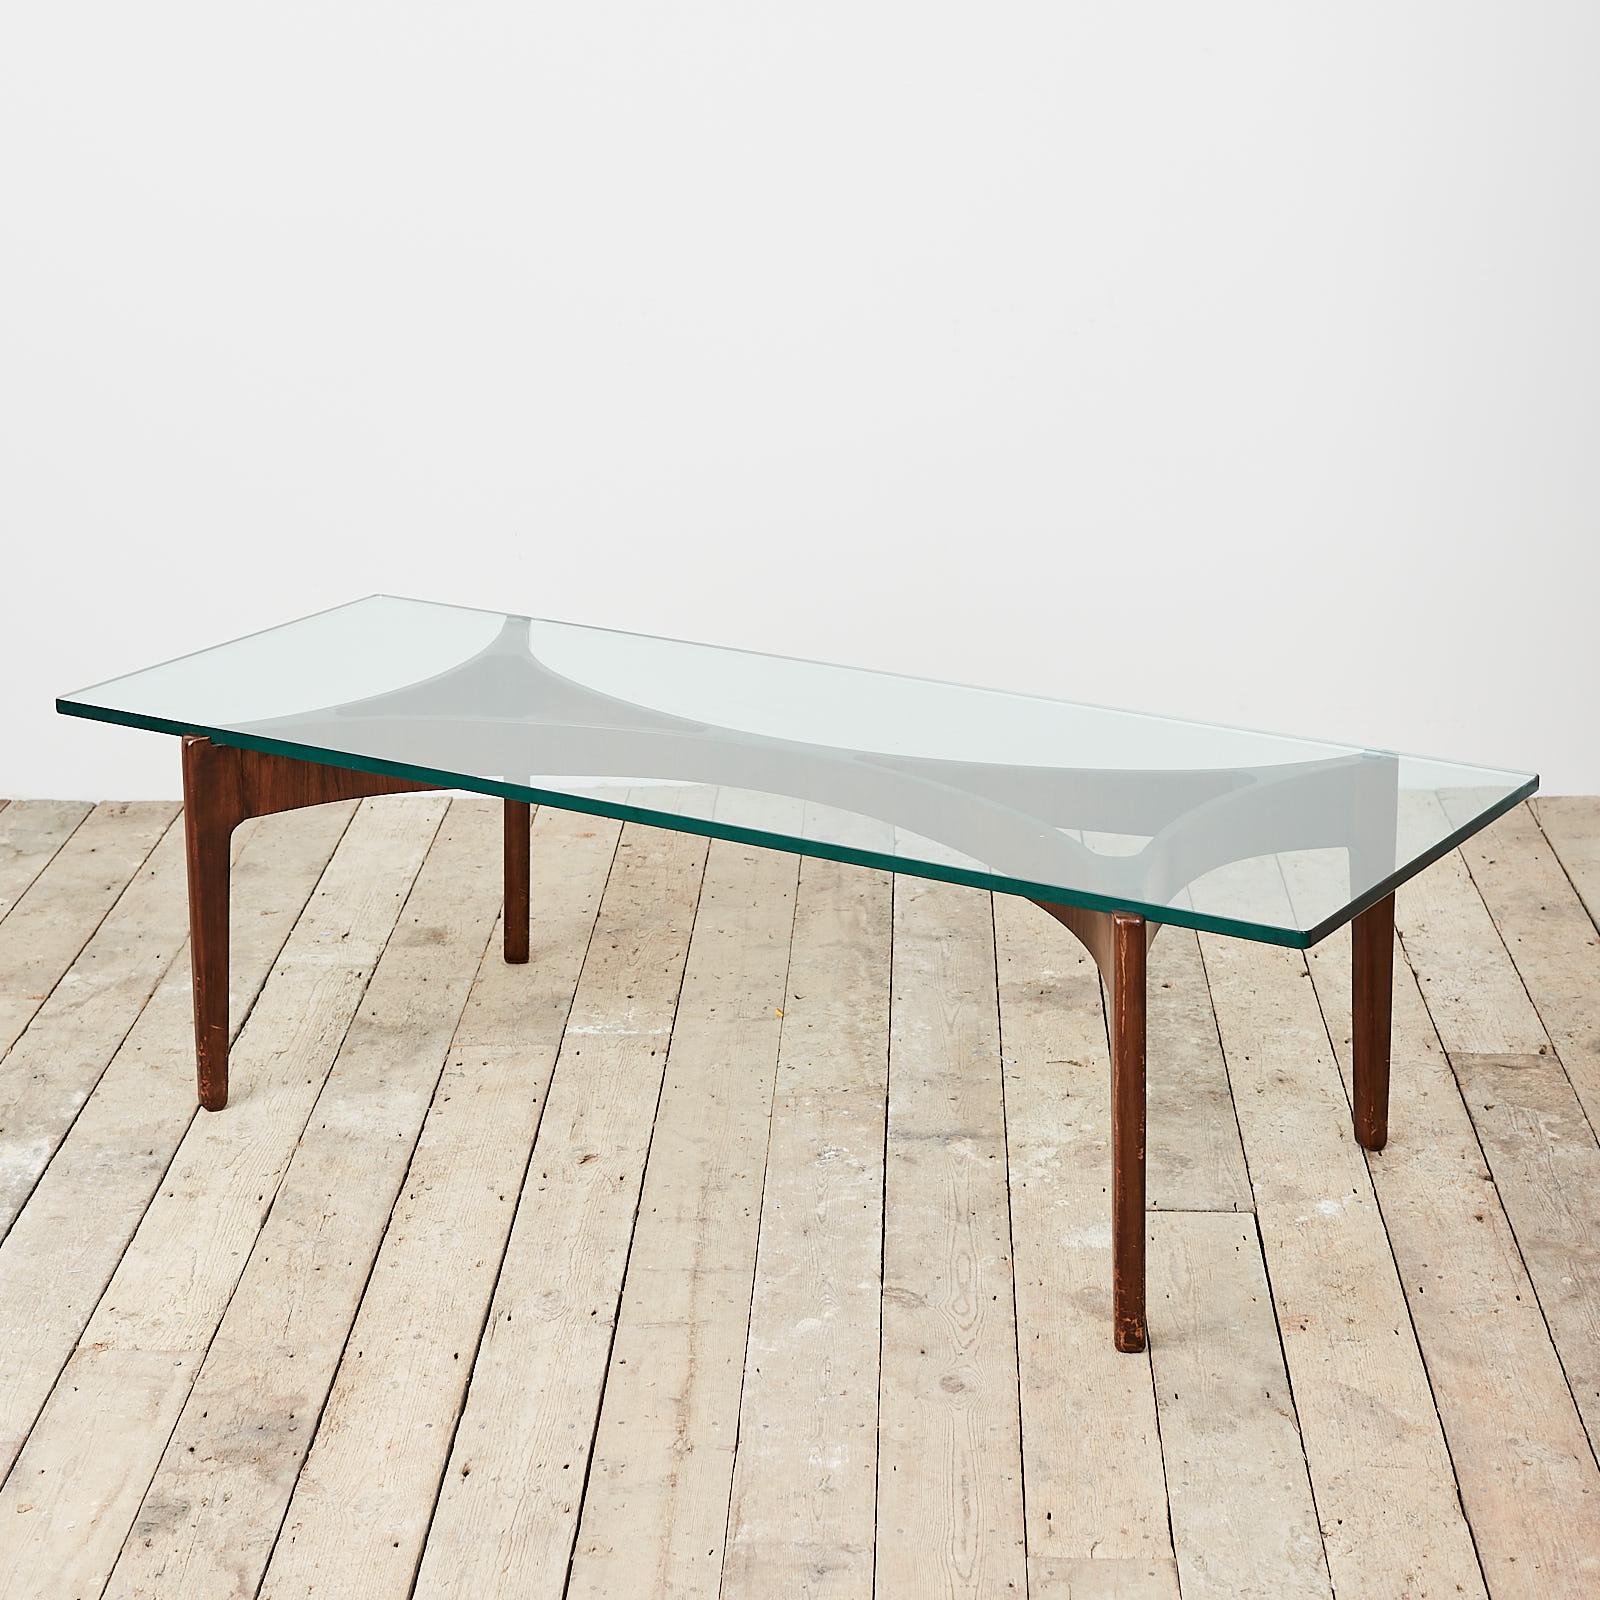 A cocktail table by Sven Ellekaer, with a curved teak base and glass top. Manufactured by Christian Linnebergs Møbelfabrik, Denmark, circa 1960. There are some losses to the teak base and a small chip to the top.